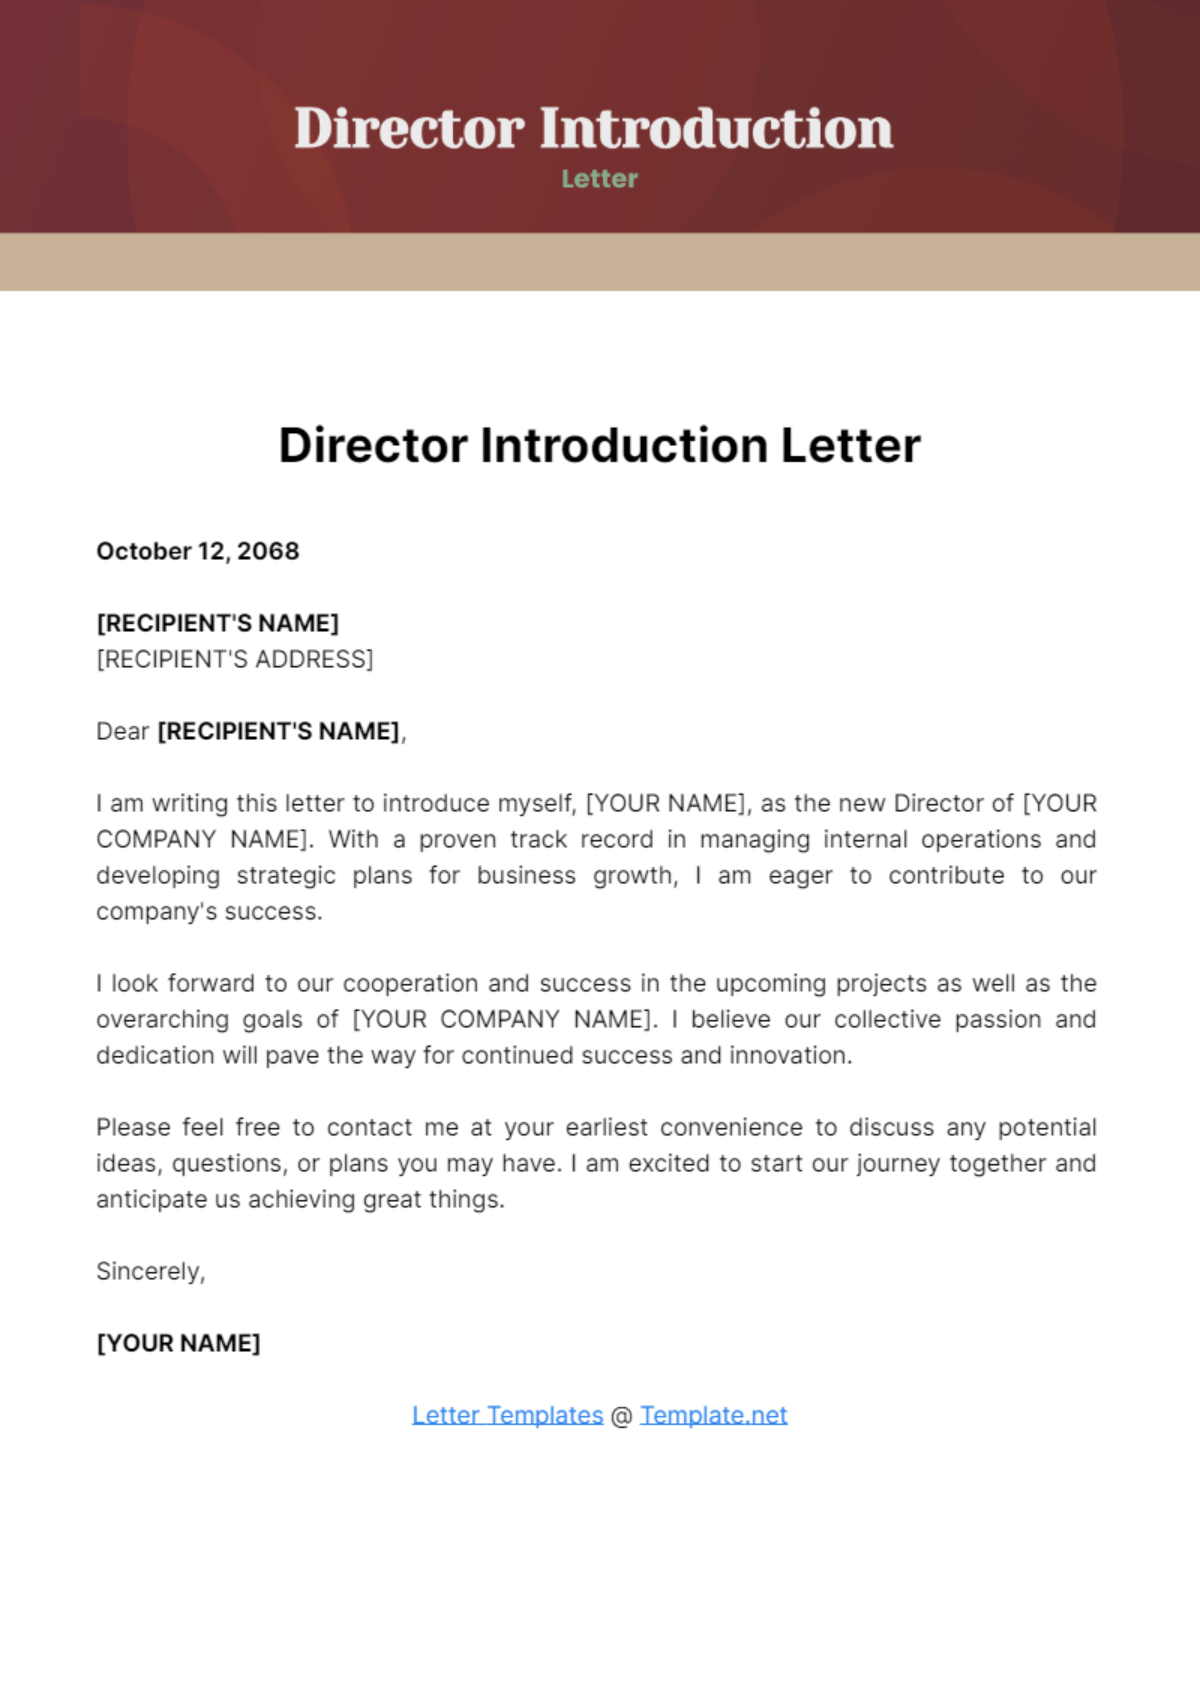 Free Director Introduction Letter Template